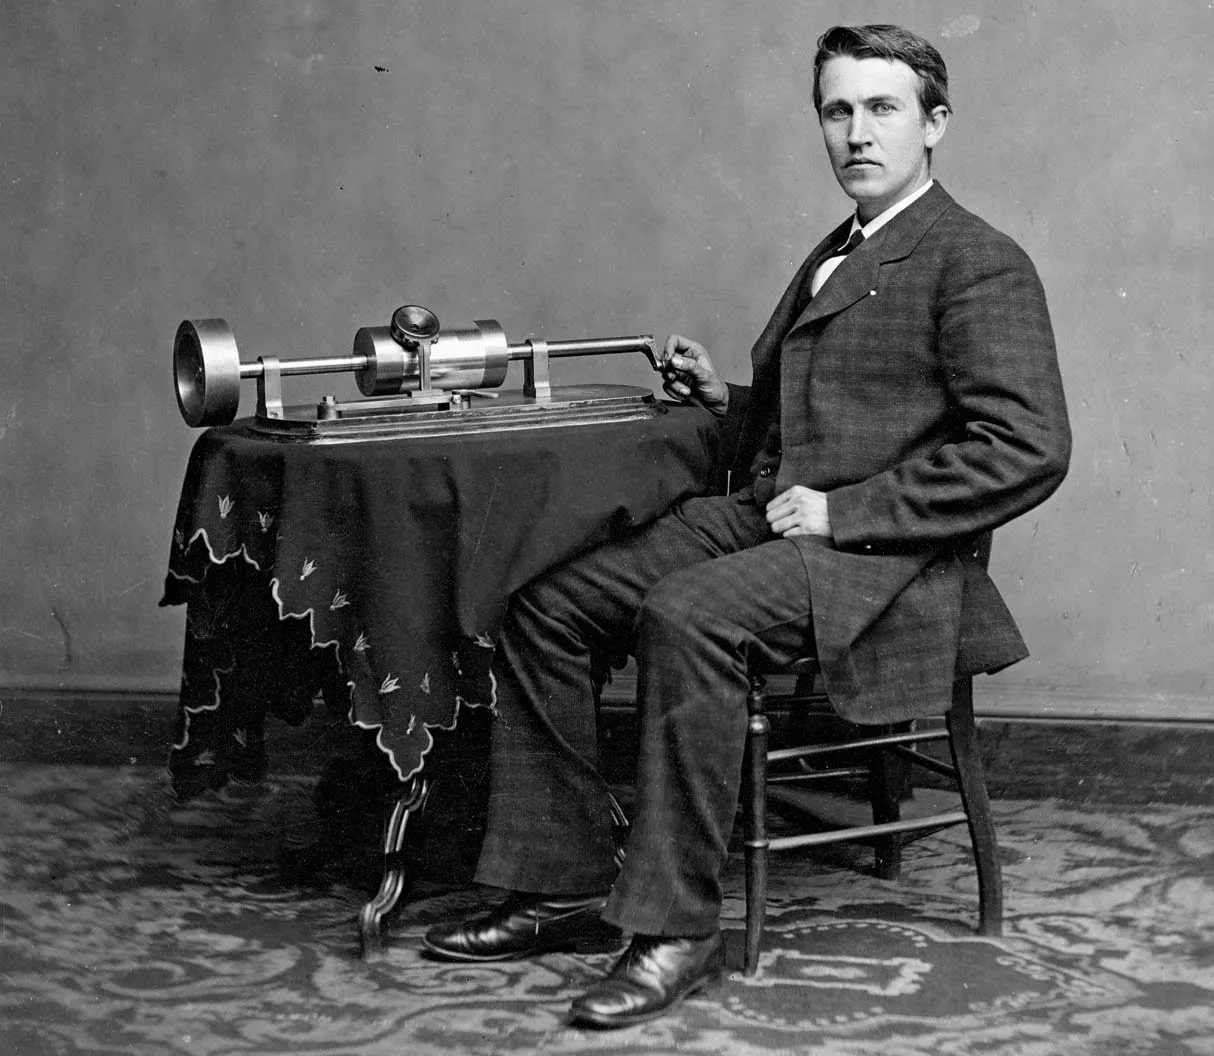 27 interesting facts about Thomas Edison